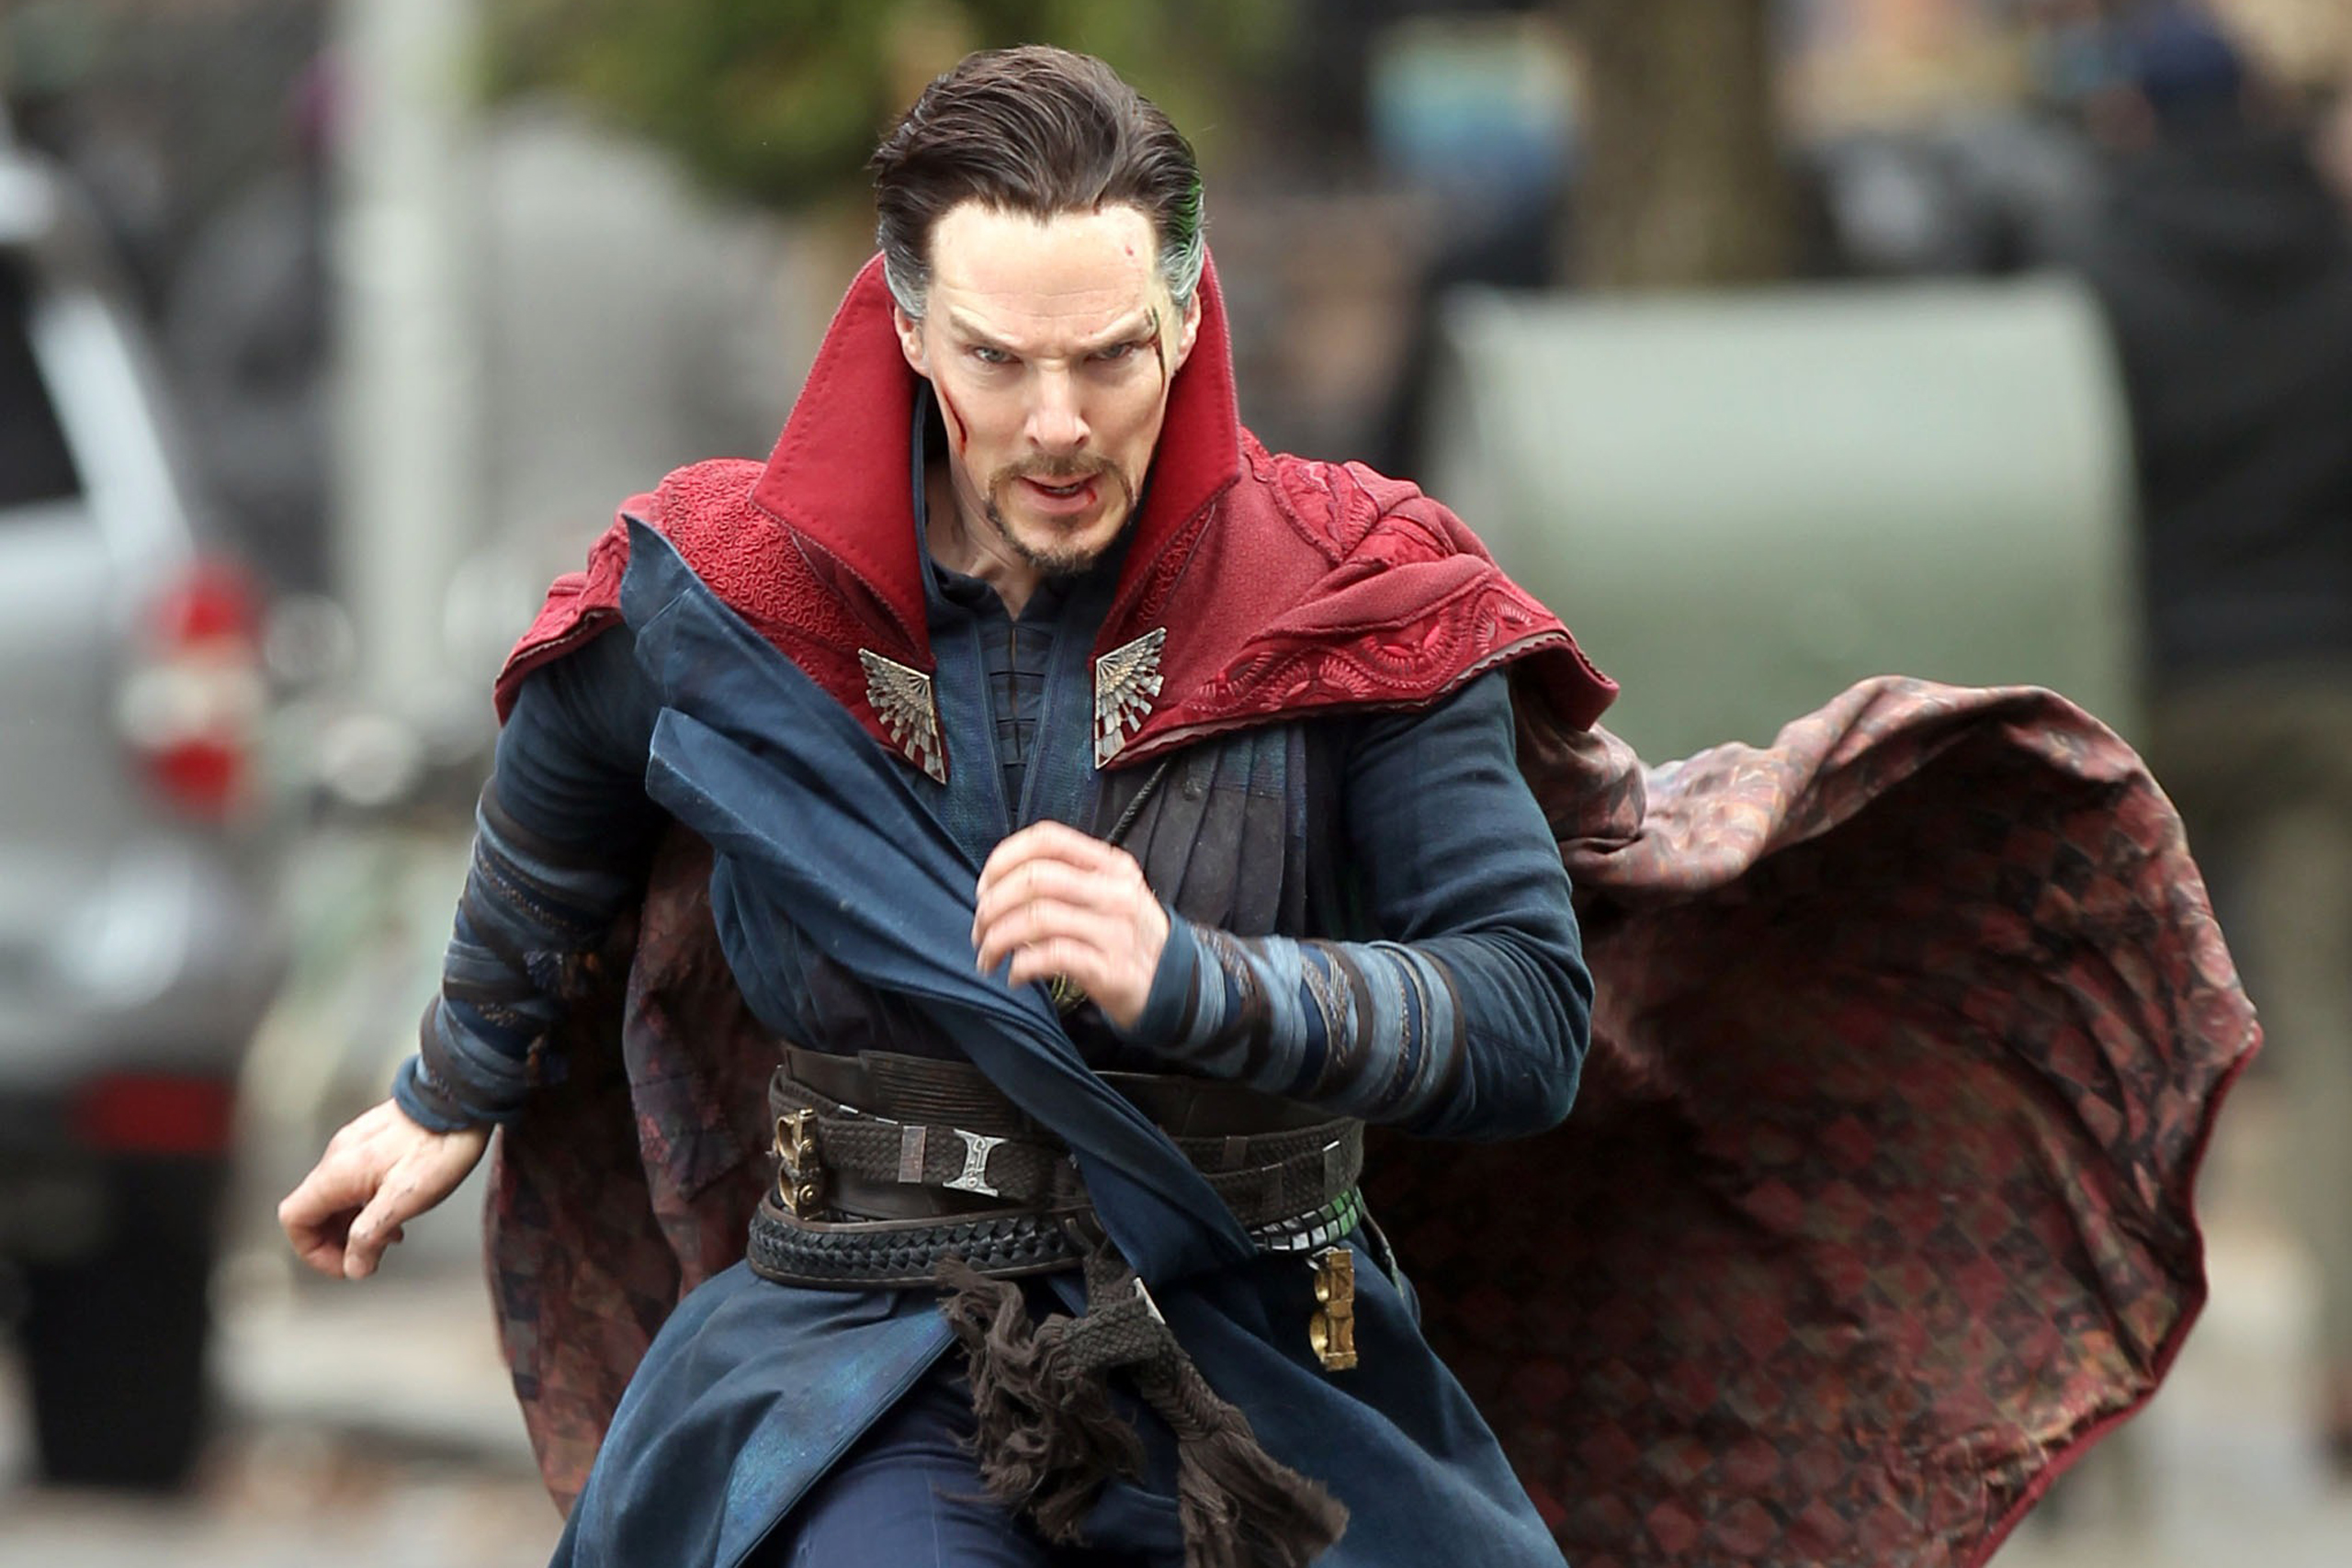 Benedict Cumberbatch filming "Doctor Strange" in New York City, on April 2, 2016. (Steve Sands—GC Images/Getty Images)